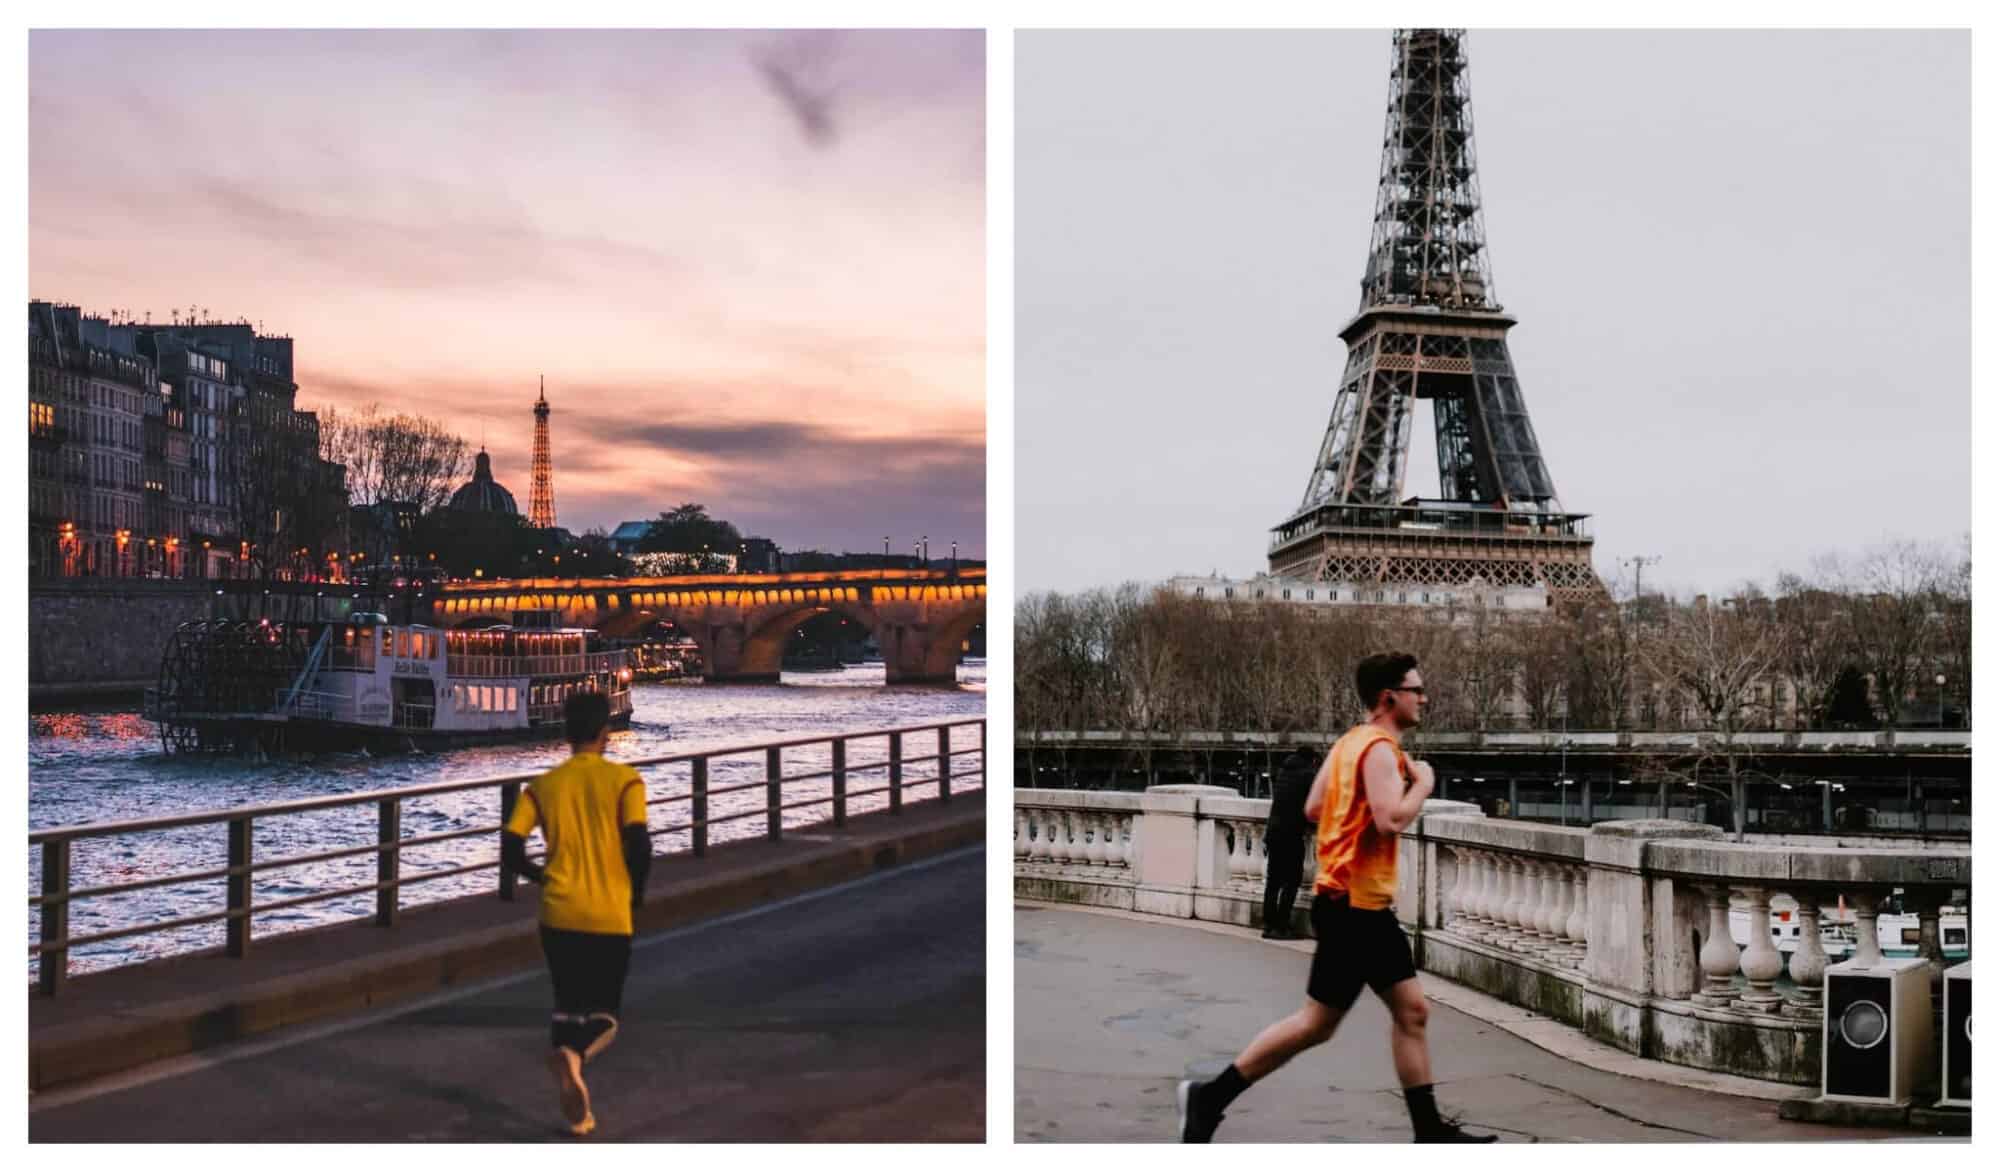 Left: A man in yellow shirt runs by the banks of the Seine river. Right: A man in an orange top runs nearby the Eiffel Tower.